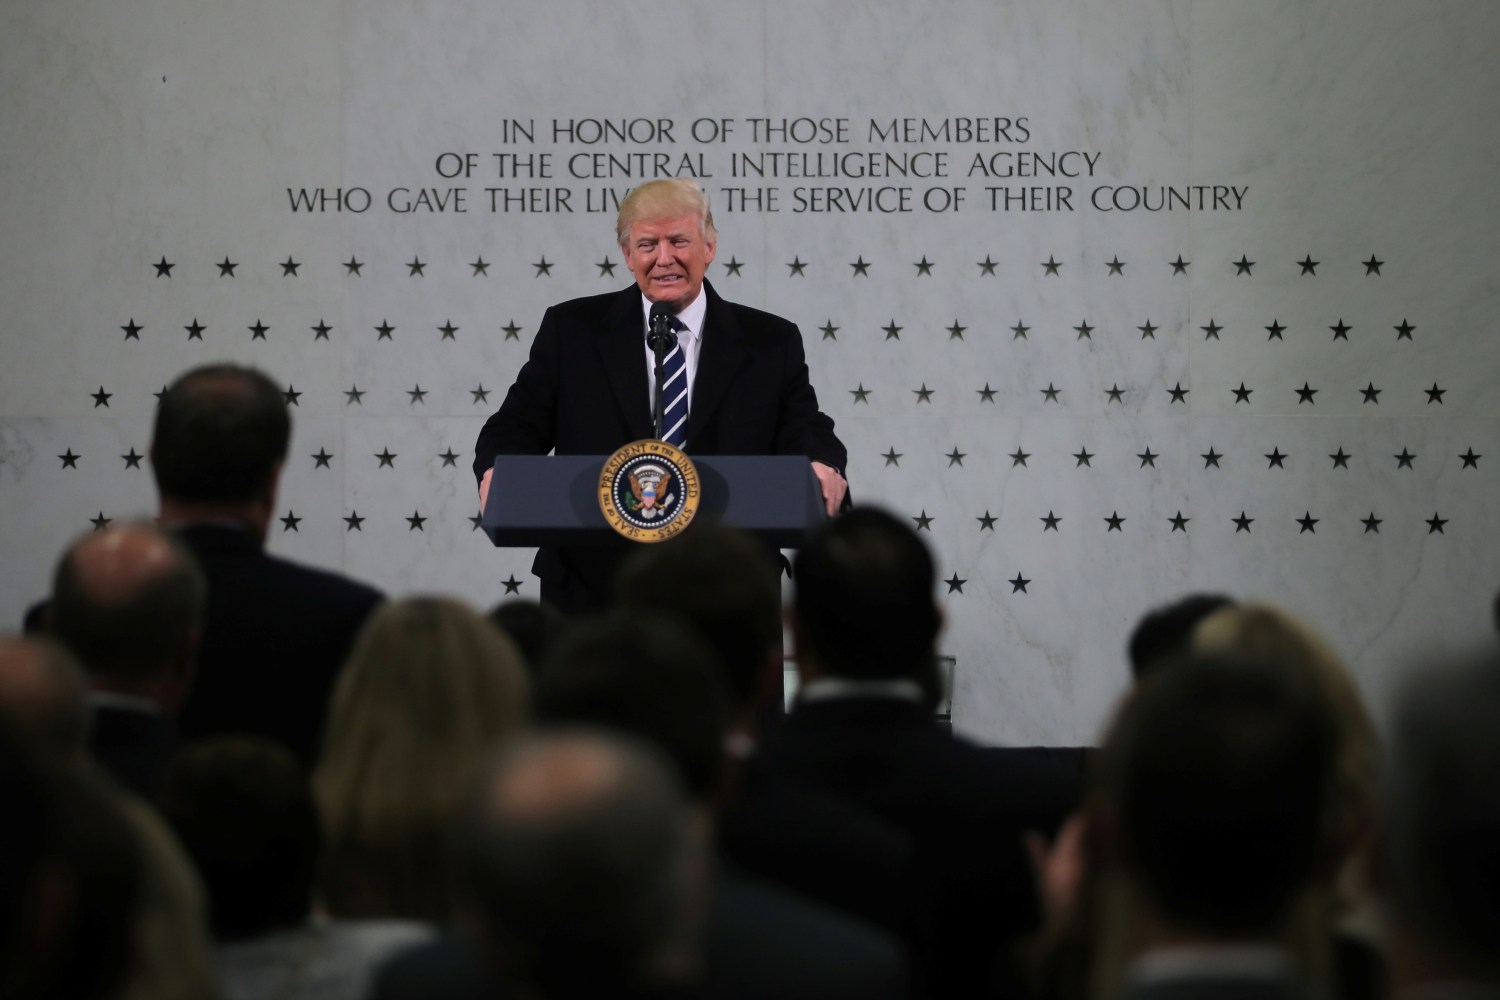 U.S. President Donald Trump delivers remarks during a visit to the Central Intelligence Agency (CIA) in Langley, Virginia